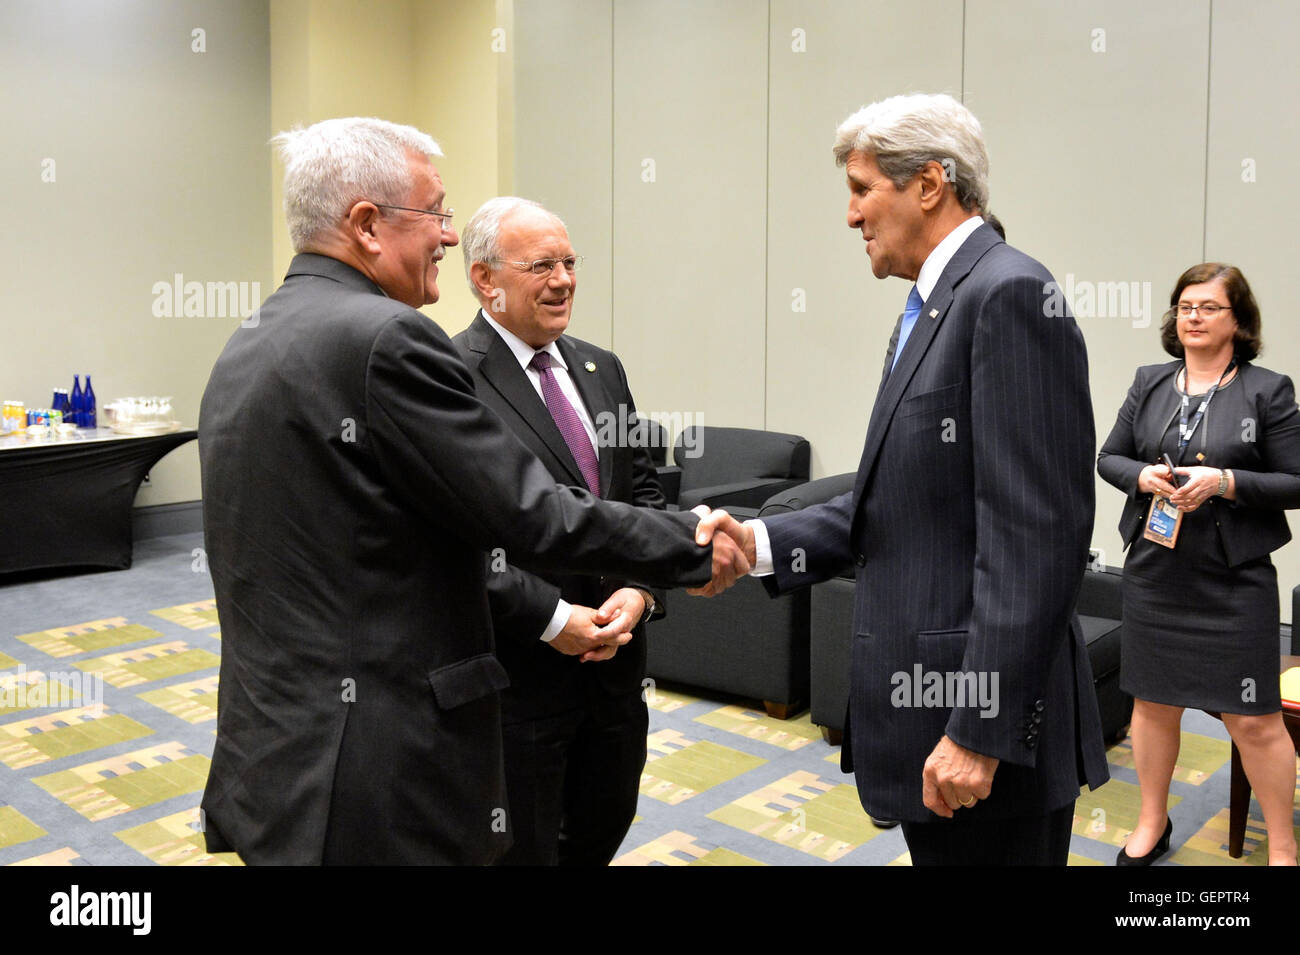 Secretary Kerry Greets Swiss Ambassador Dahinden Before His Meeting With Swiss President Schneider-Ammann at the 2016 Nuclear Security Summit in Washington Stock Photo